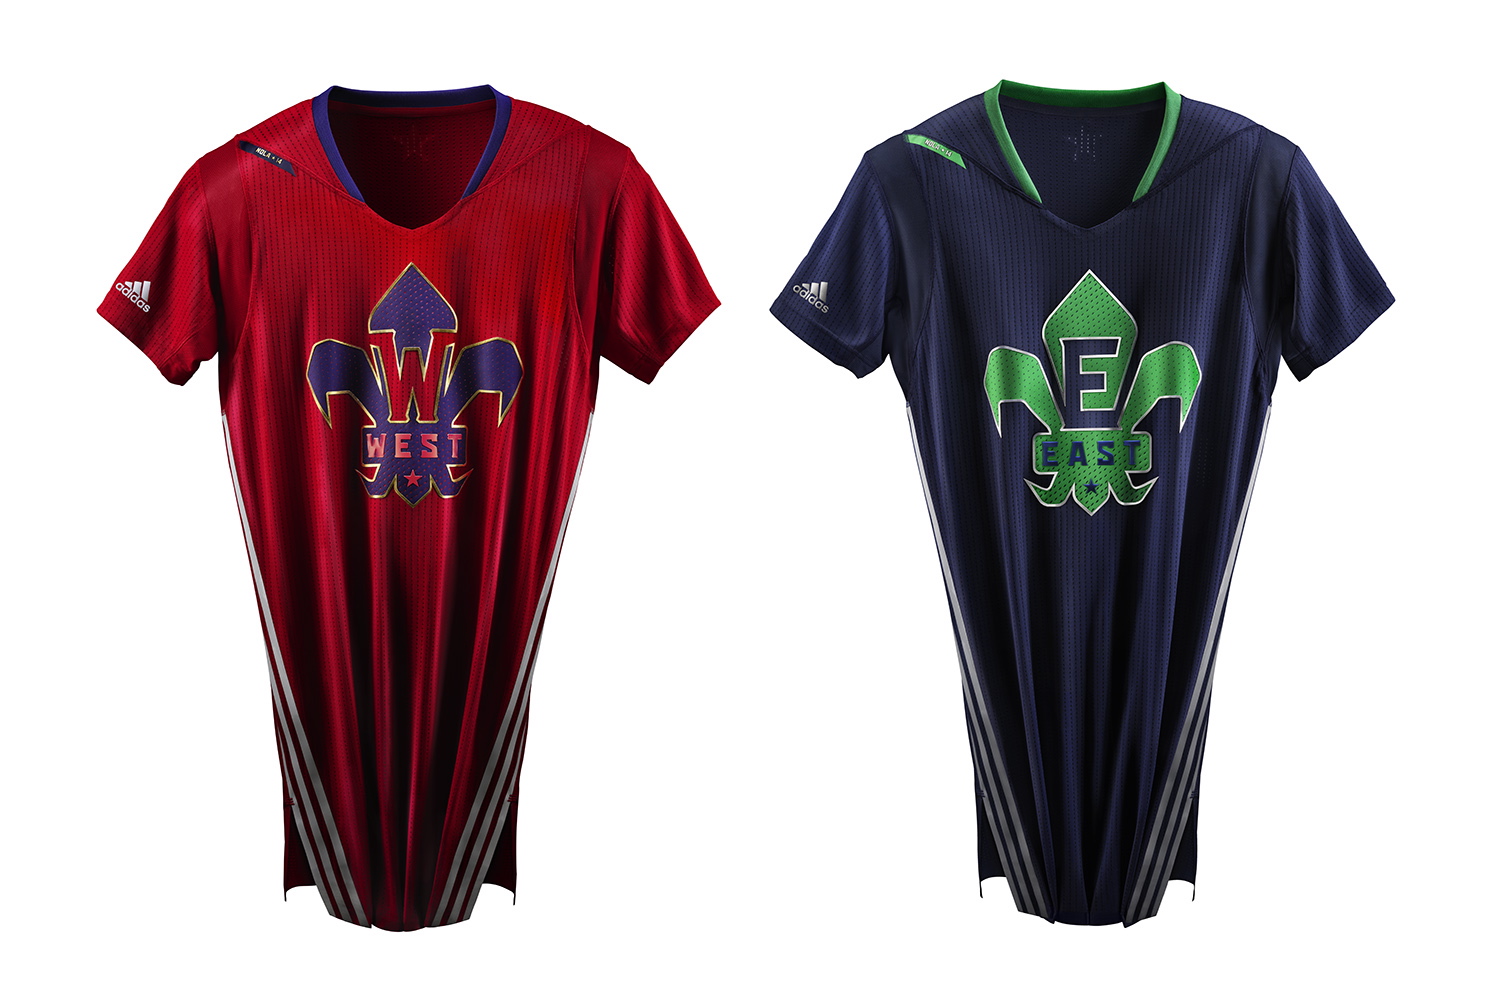 The West, left, and East team jerseys to be worn in the 2014 NBA All Star basketball game. The 63rd NBA All-Star Game is scheduled for Feb. 16, in New Orleans.